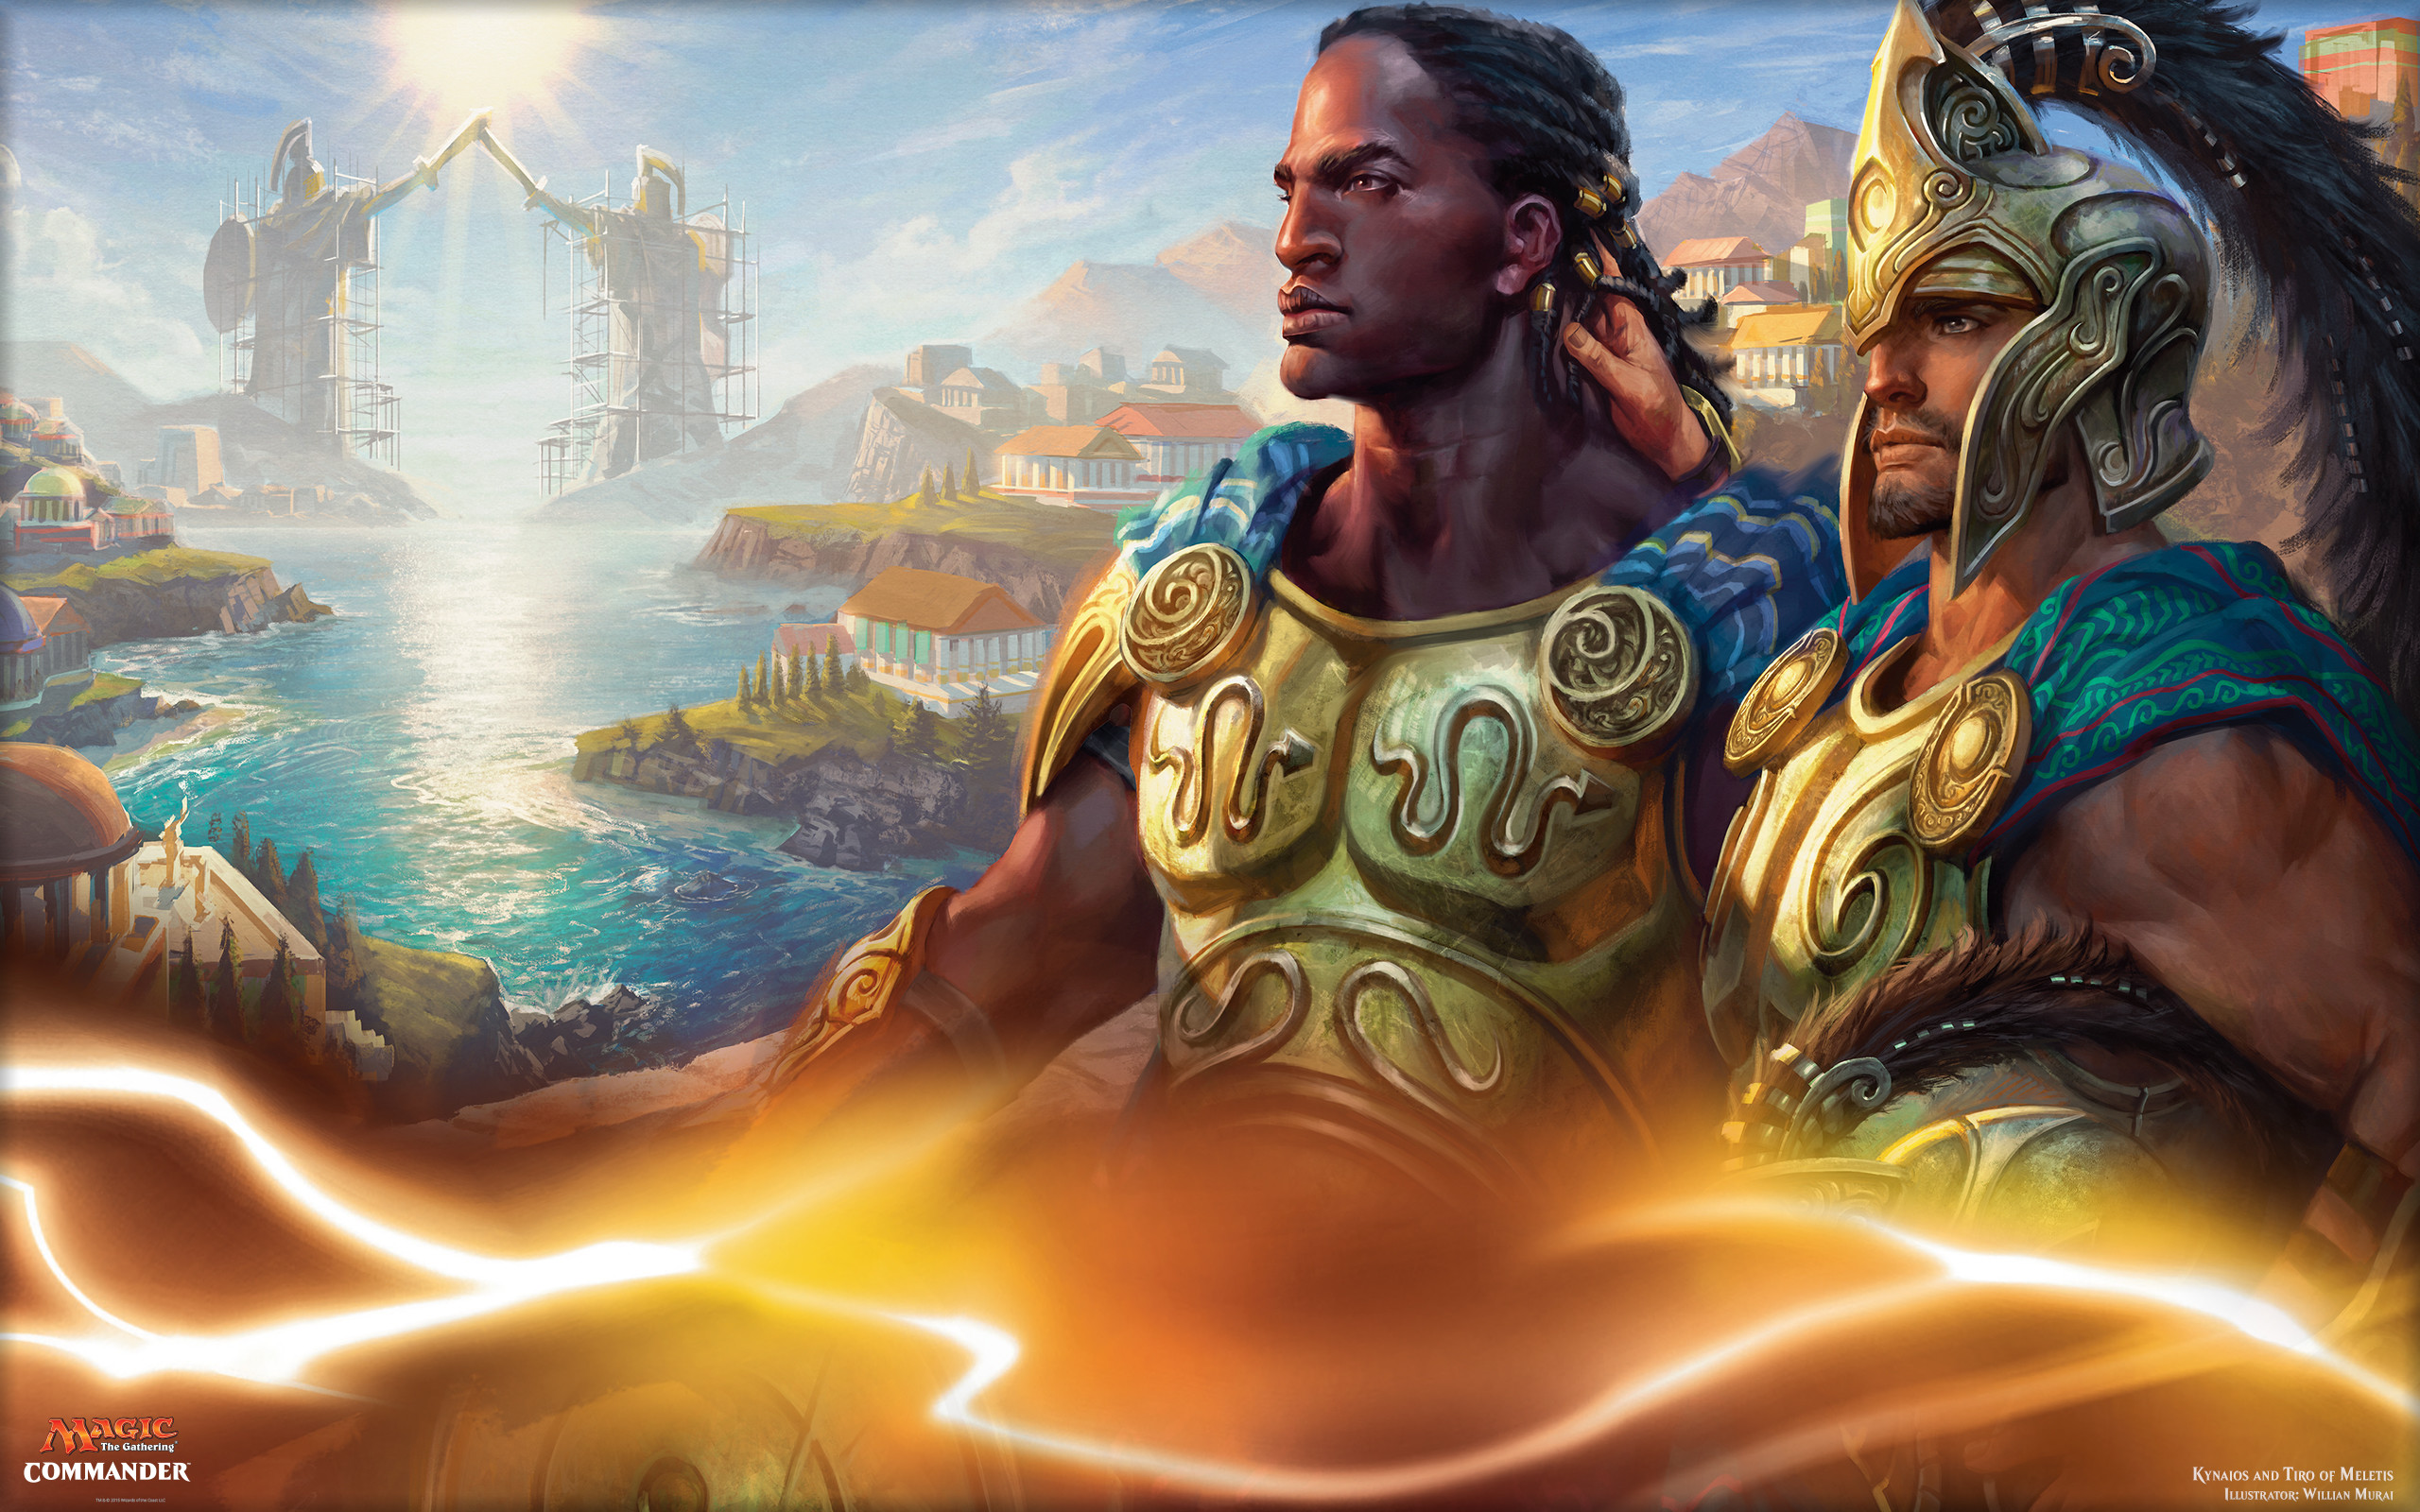 2560x1600 Magic the Gathering images Kynaios and Tiro of Meletis HD wallpaper and  background photos